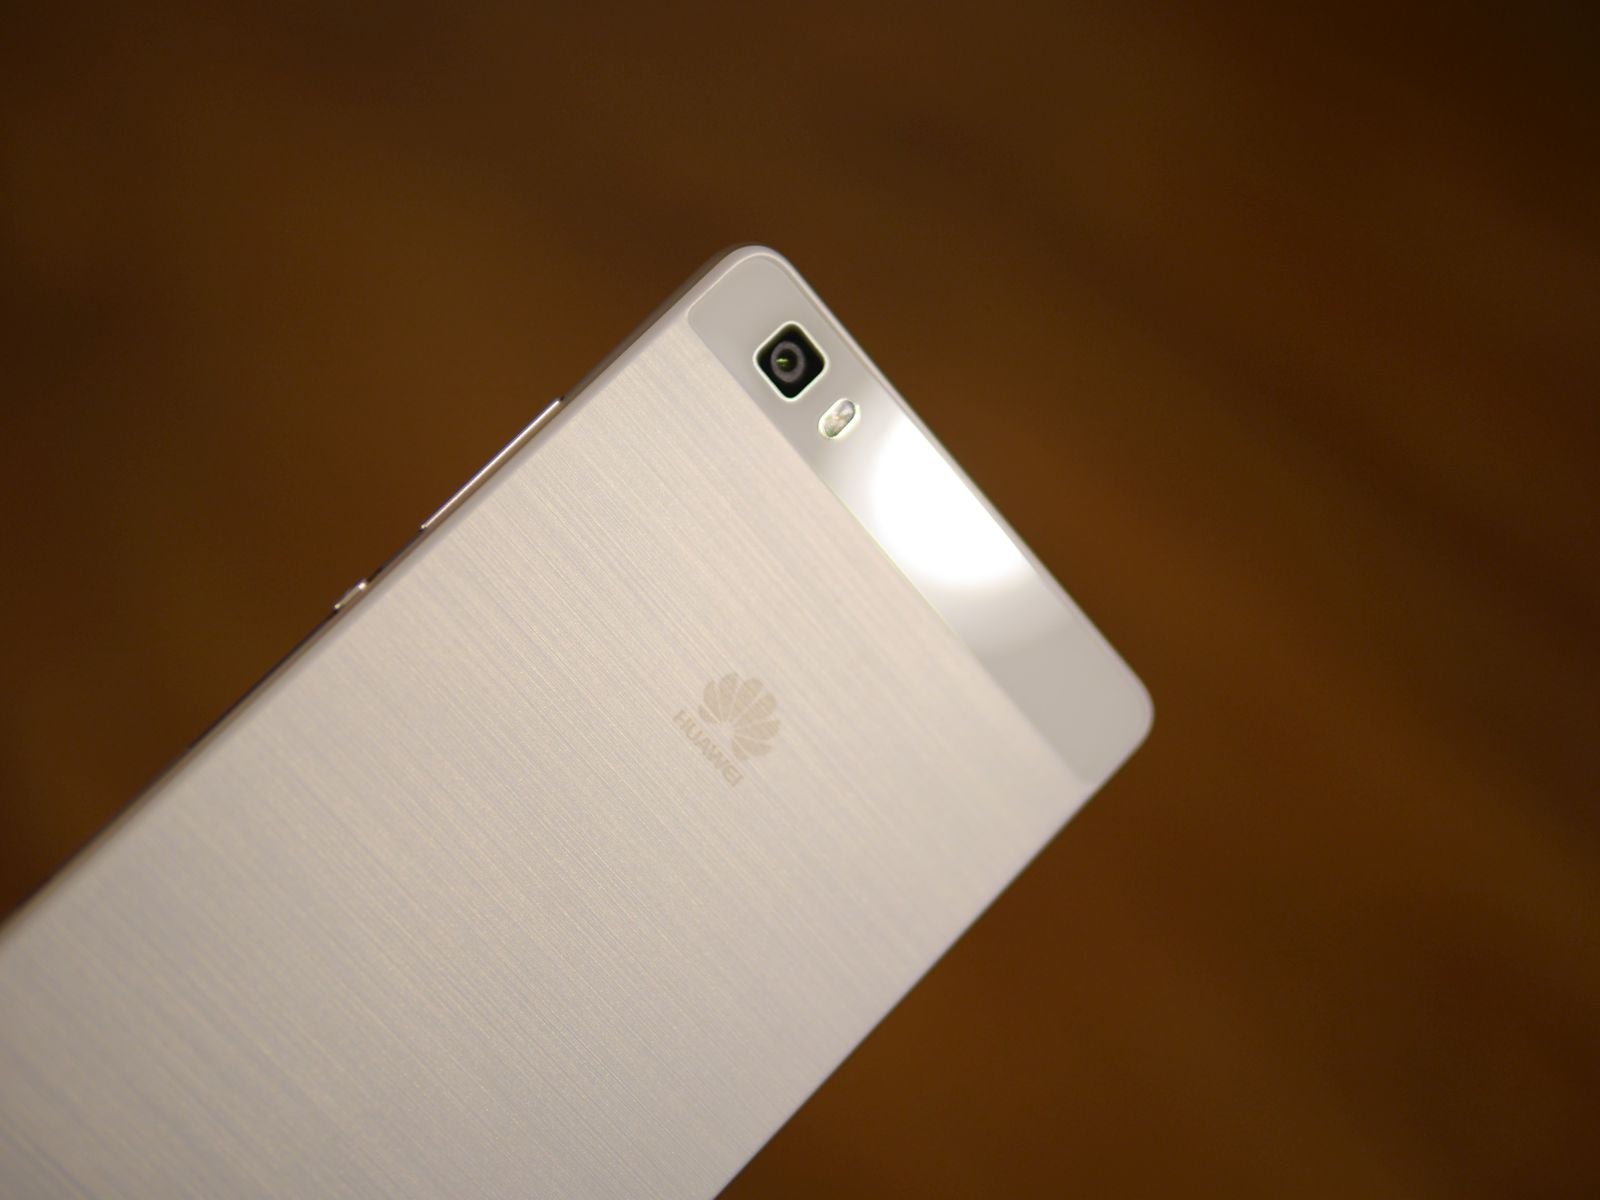 Huawei P8 Lite hands-on